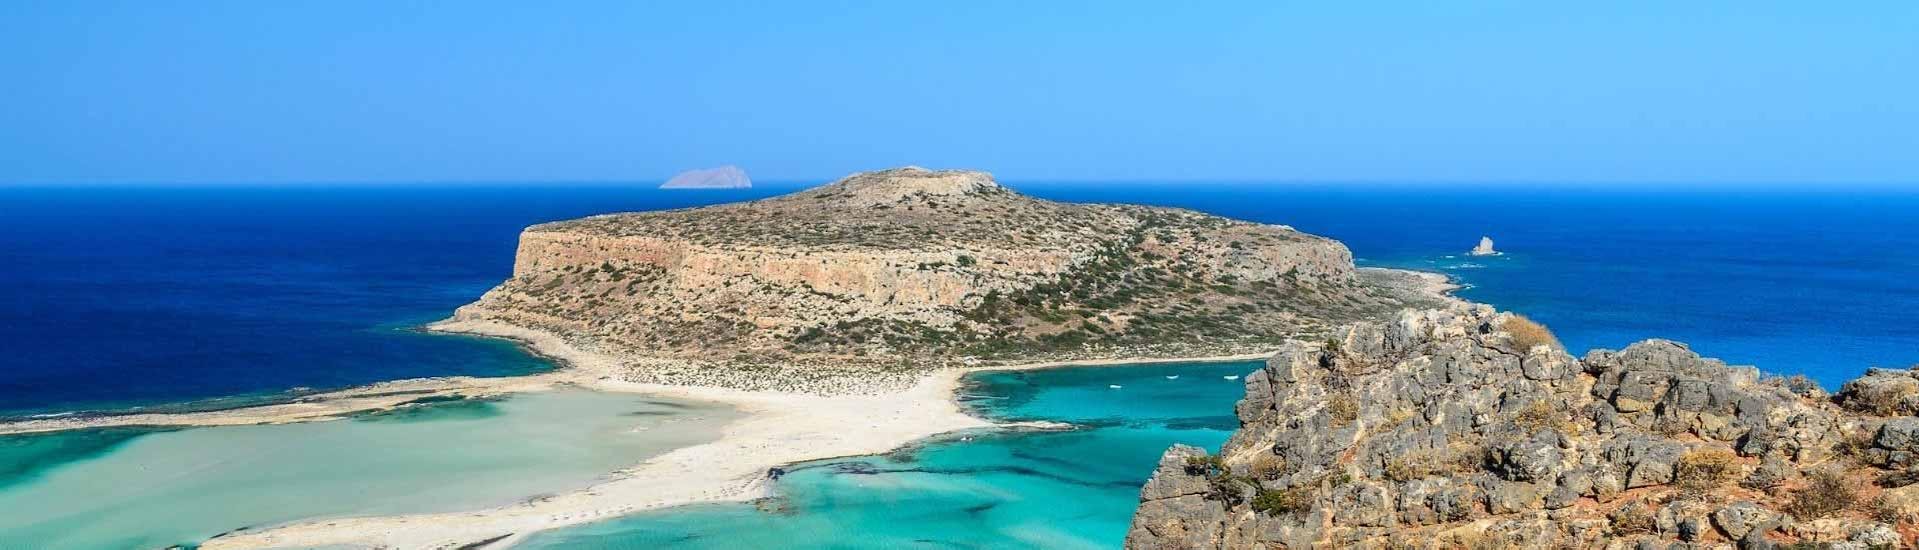 One of the beaches you can visit with a boat trip with Crucero Al Paraiso Kissamos.